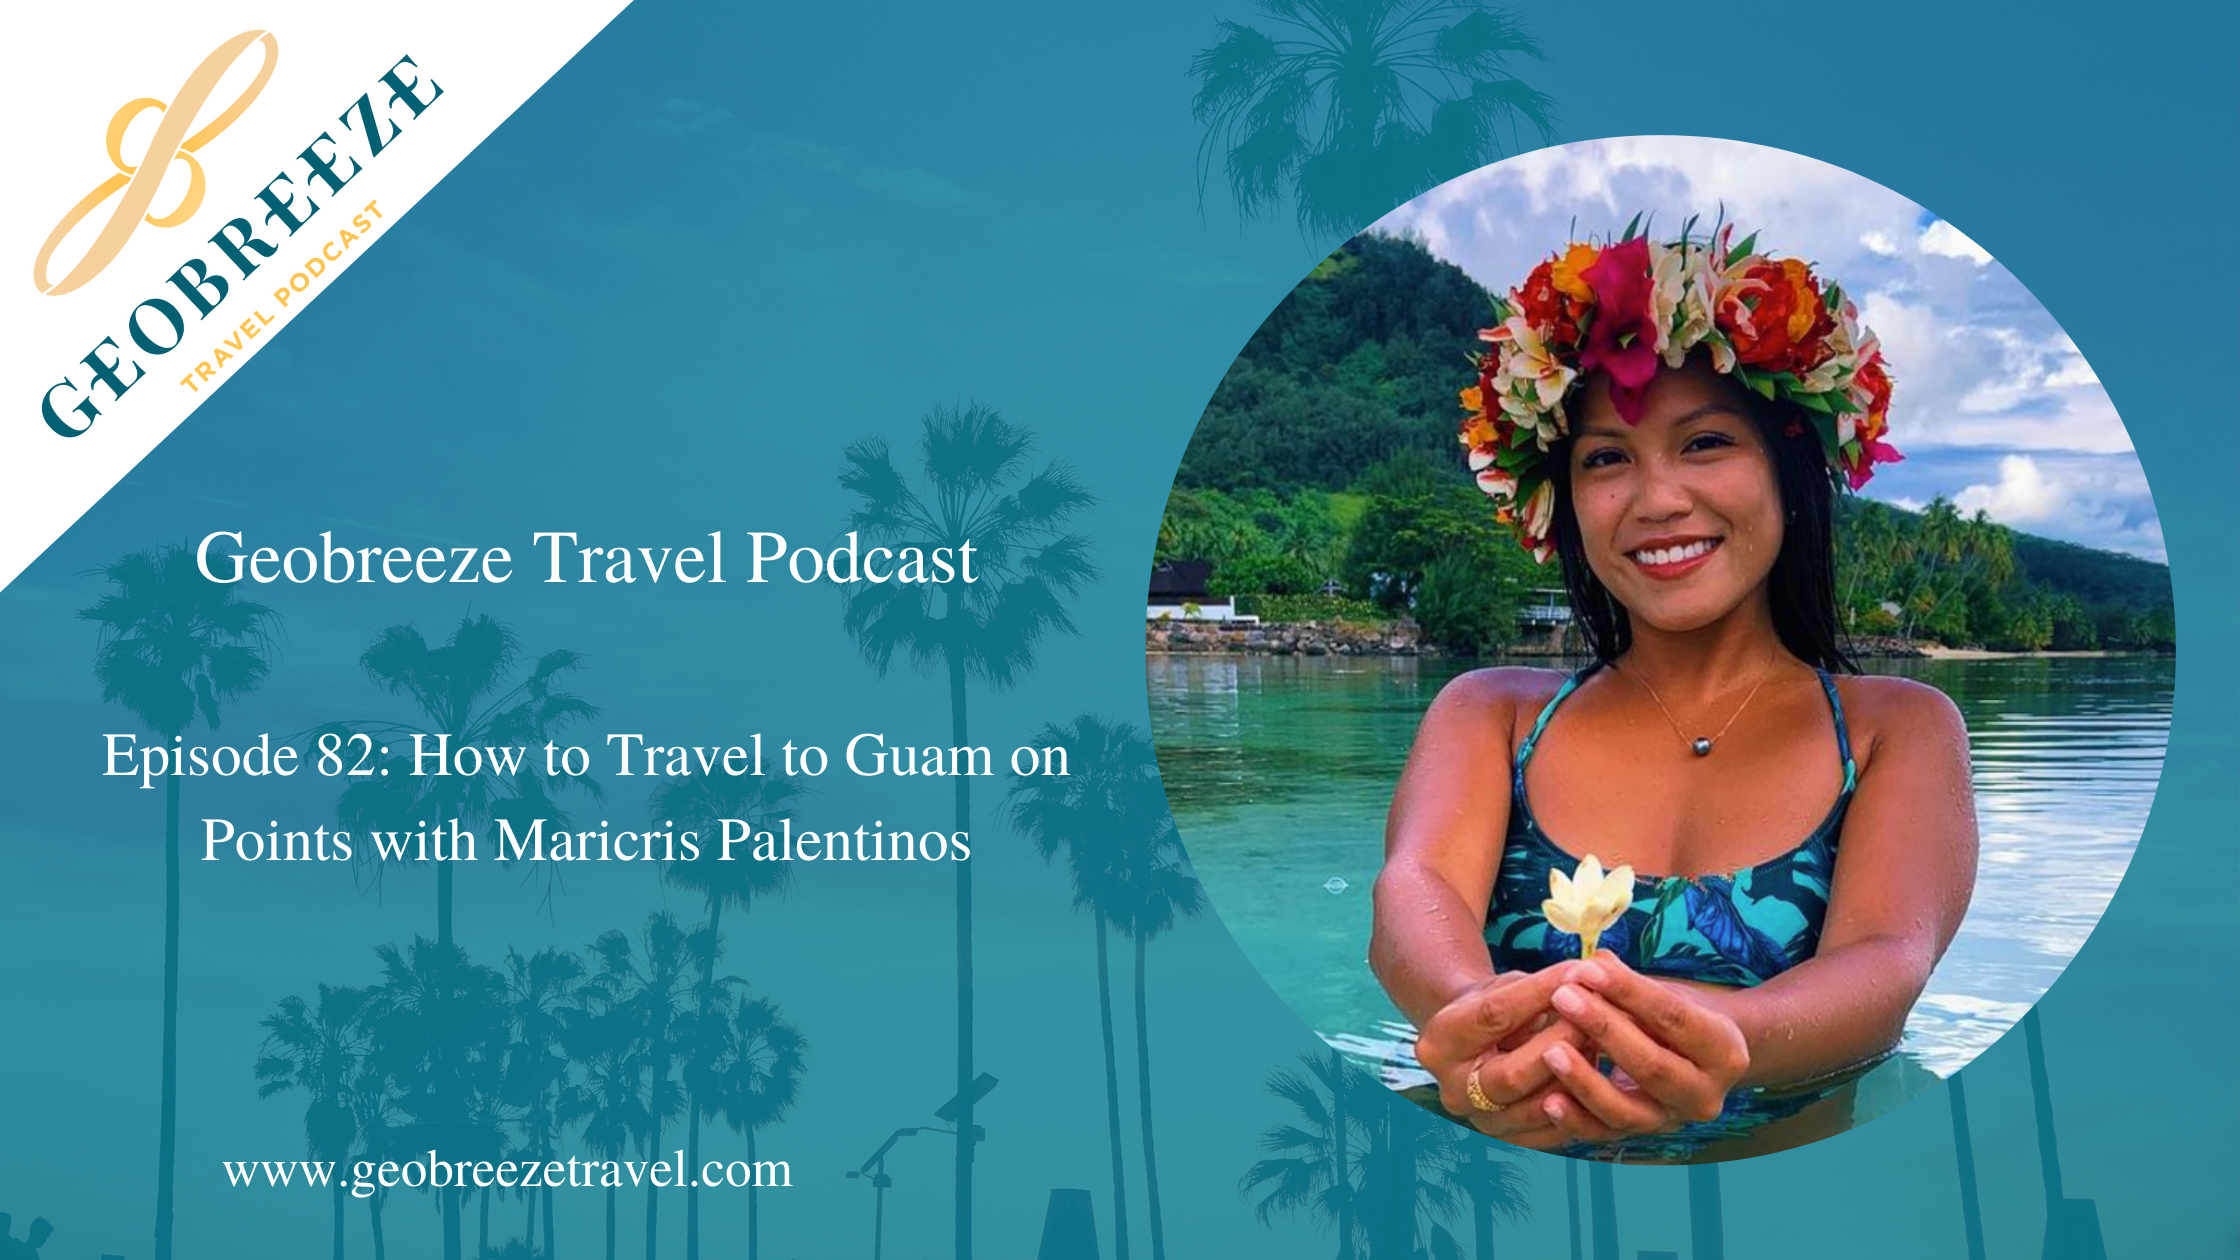 Episode 82: How to Travel to Guam on Points with Maricris Palentinos